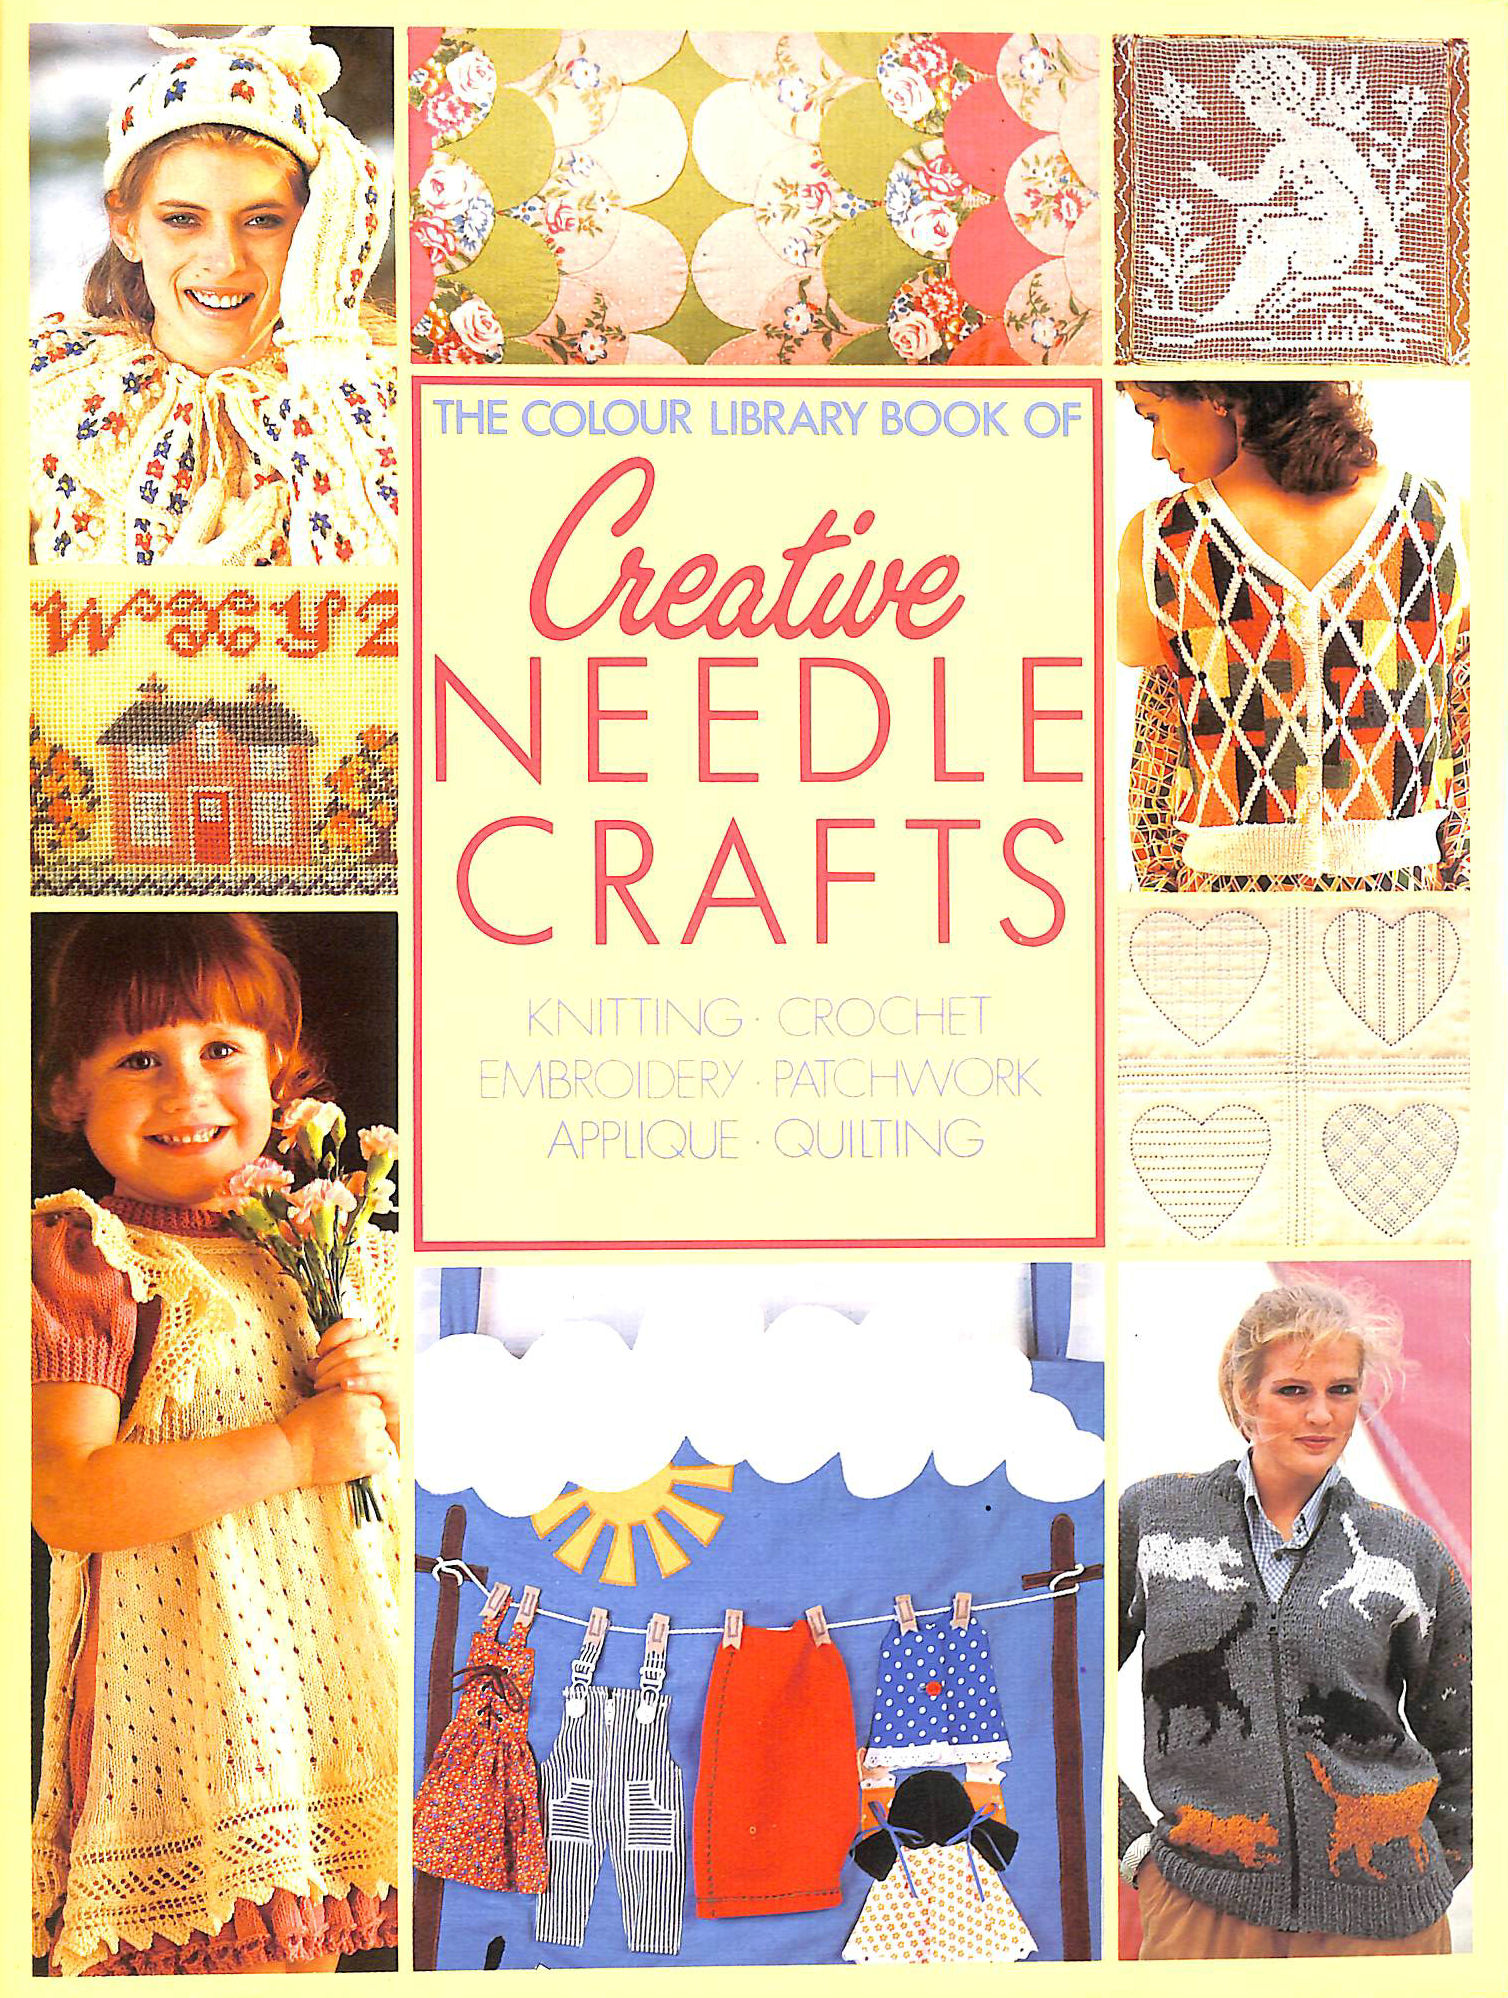 ANON - A Colour Library of Creative Needle Crafts: Knitting / Crochet / Embroidery / Patchwork / Applique / Quilting